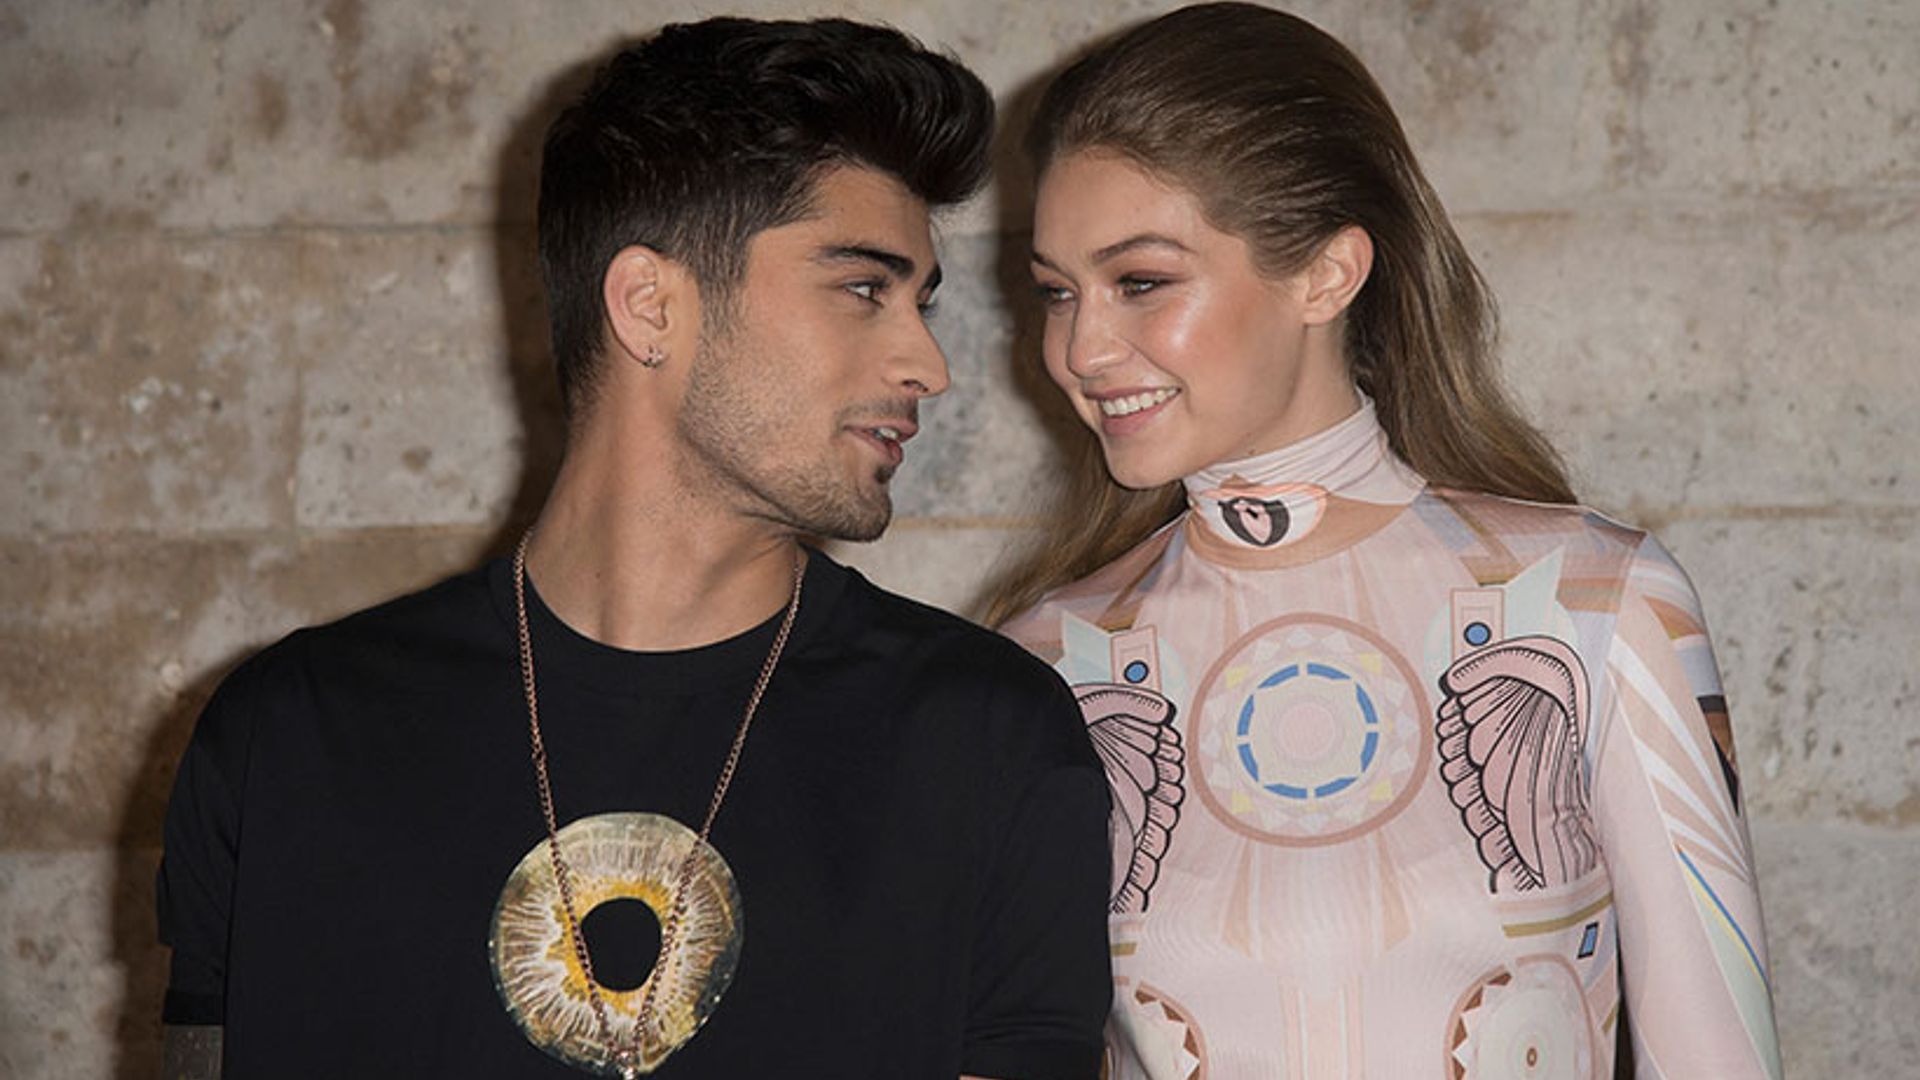 Find out how Zayn Malik and Gigi Hadid celebrated their second anniversary